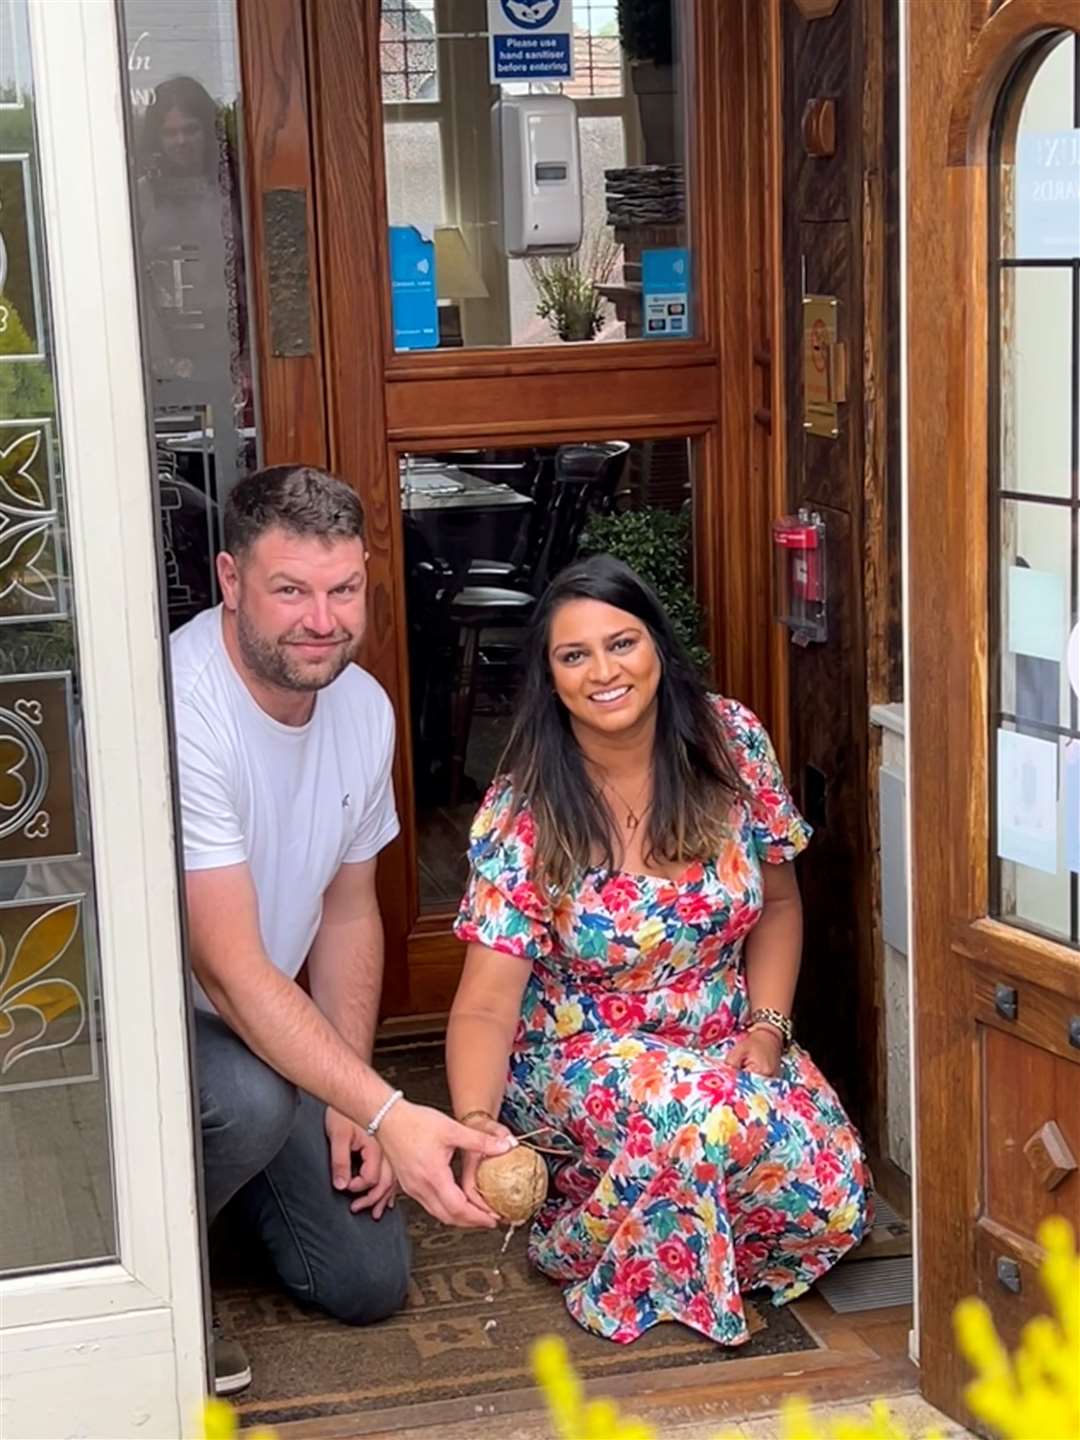 Dhvani Patel and Byron Hayter broke open a coconut over the threshold of The Tyler's Kiln for good luck in their new endeavour